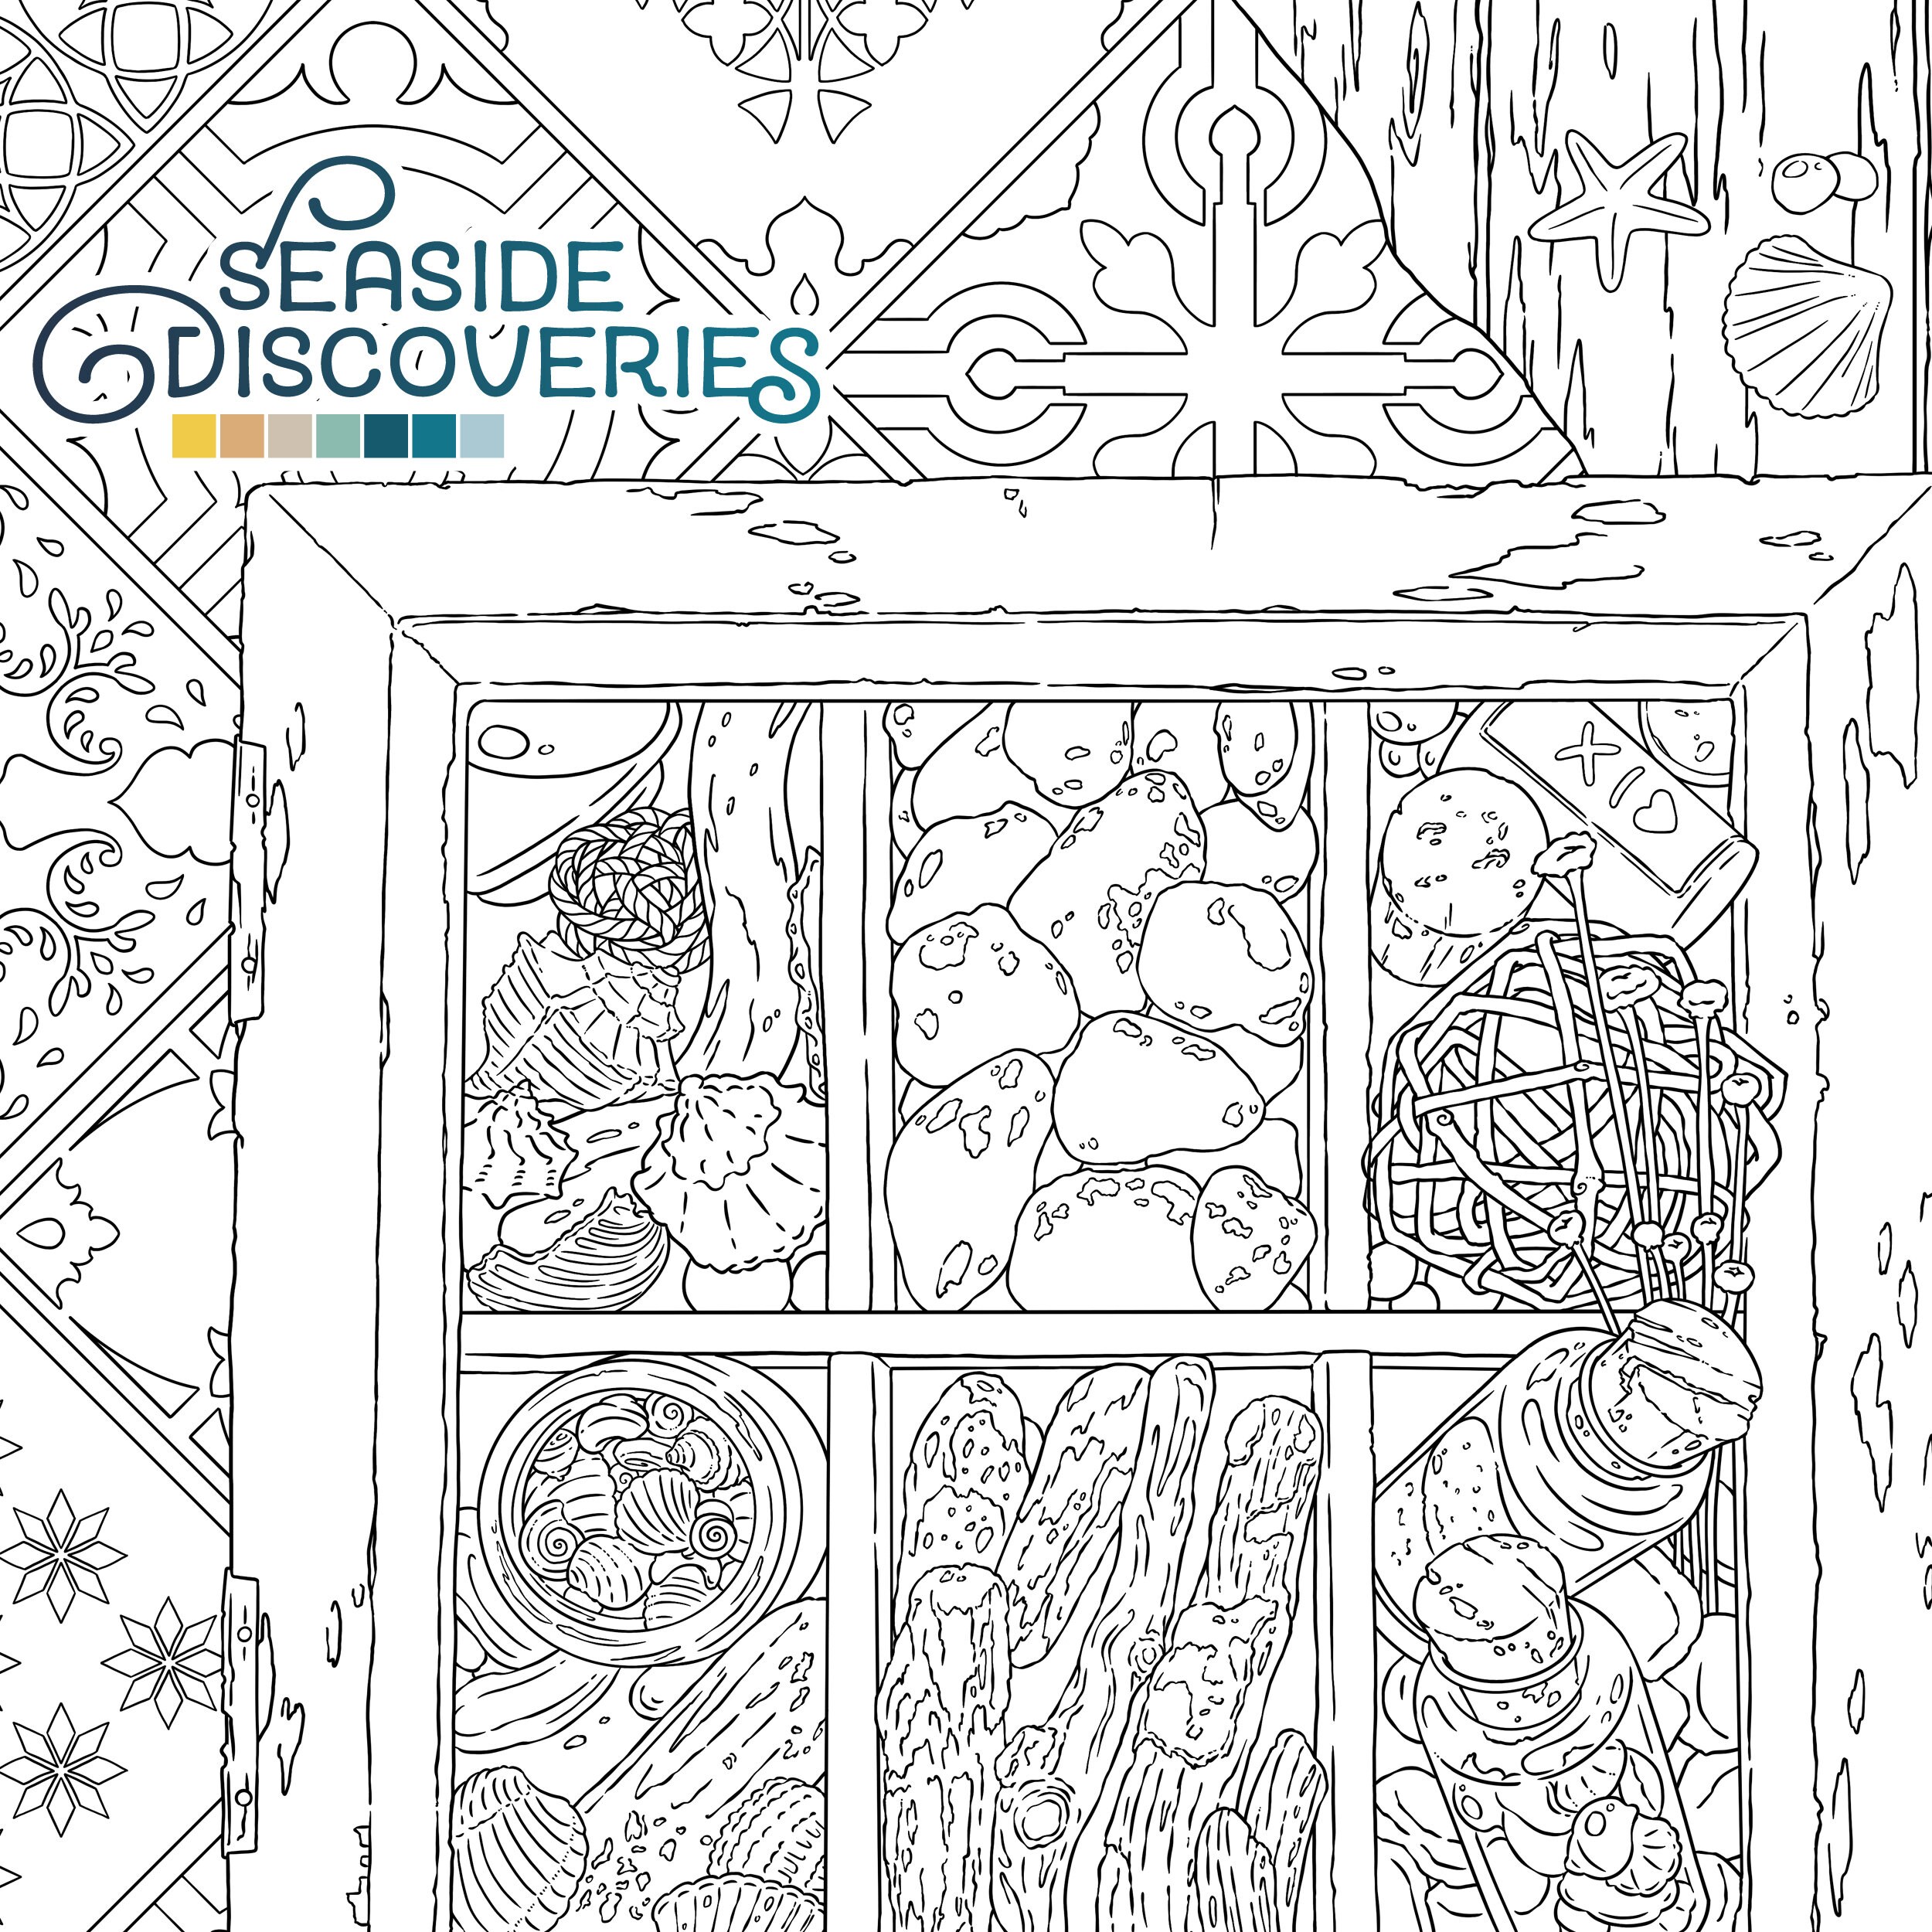 Wishing Well Adult Coloring Page Autumn Garden Illustration Cute Home  Hedgehog Mushrooms Digital Download Printable Pdf by Jen Katz 